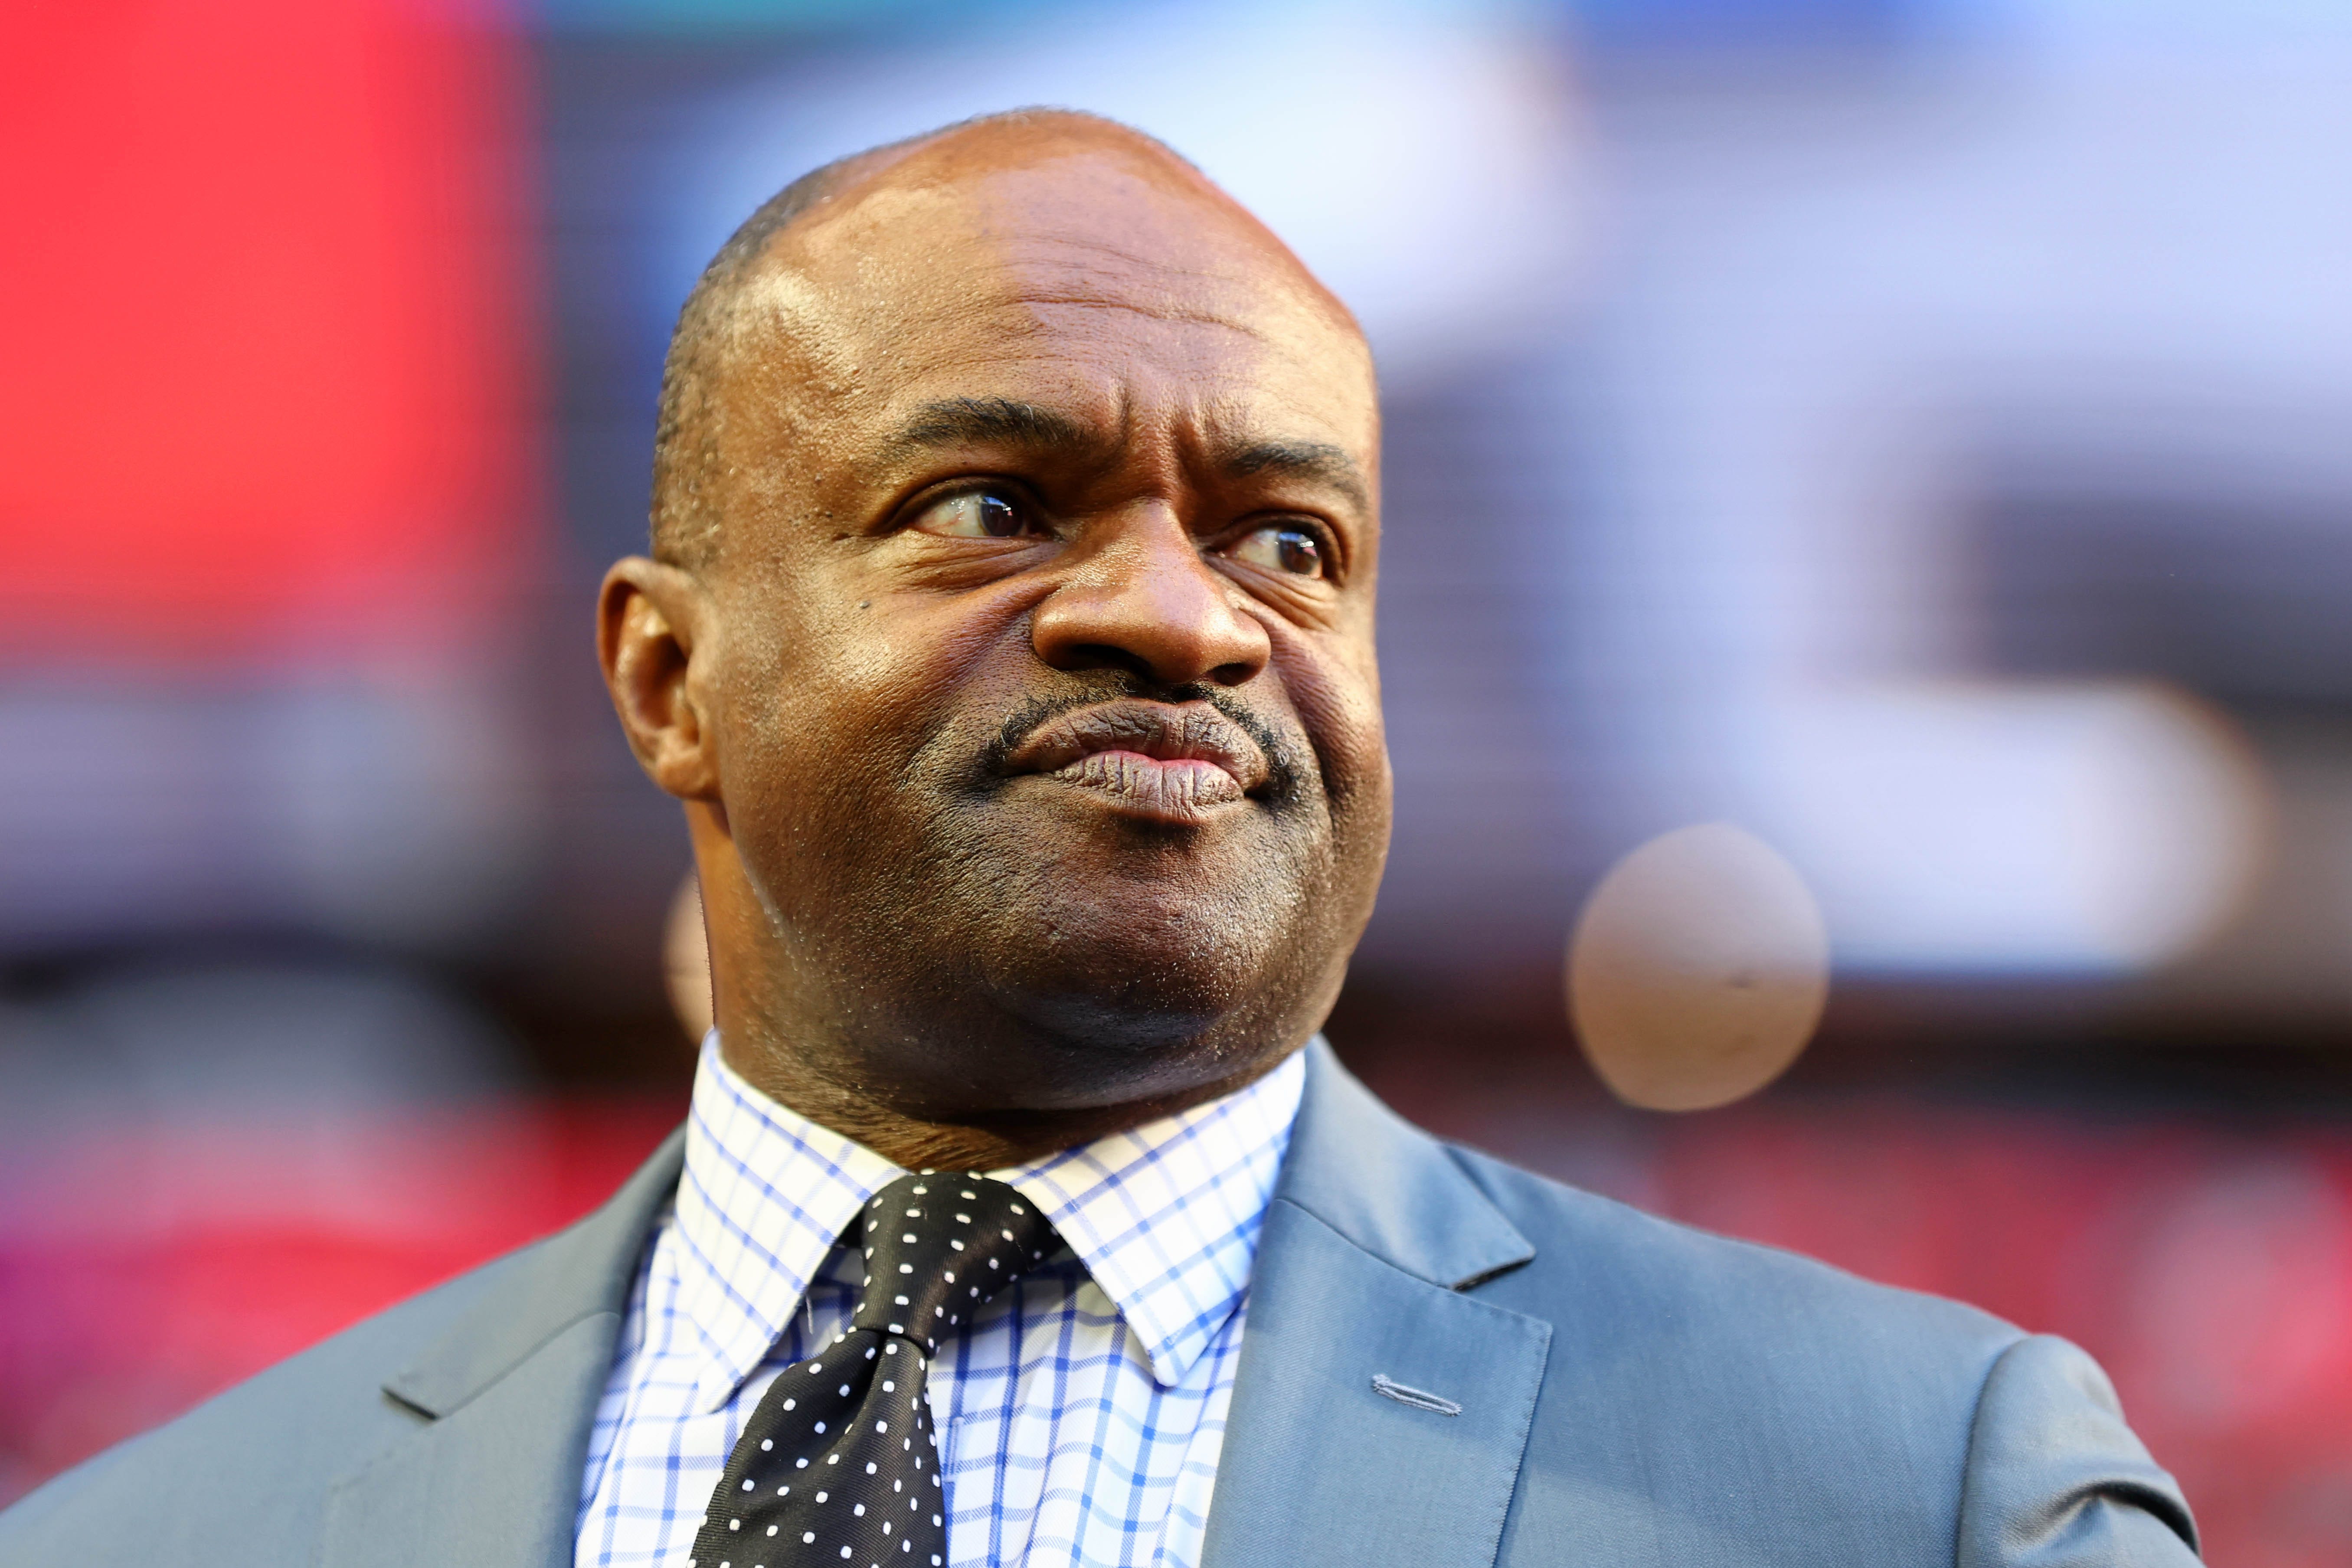 Is Rooney Rule ready for reform? Why ex-NFLPA director says change could take decades.